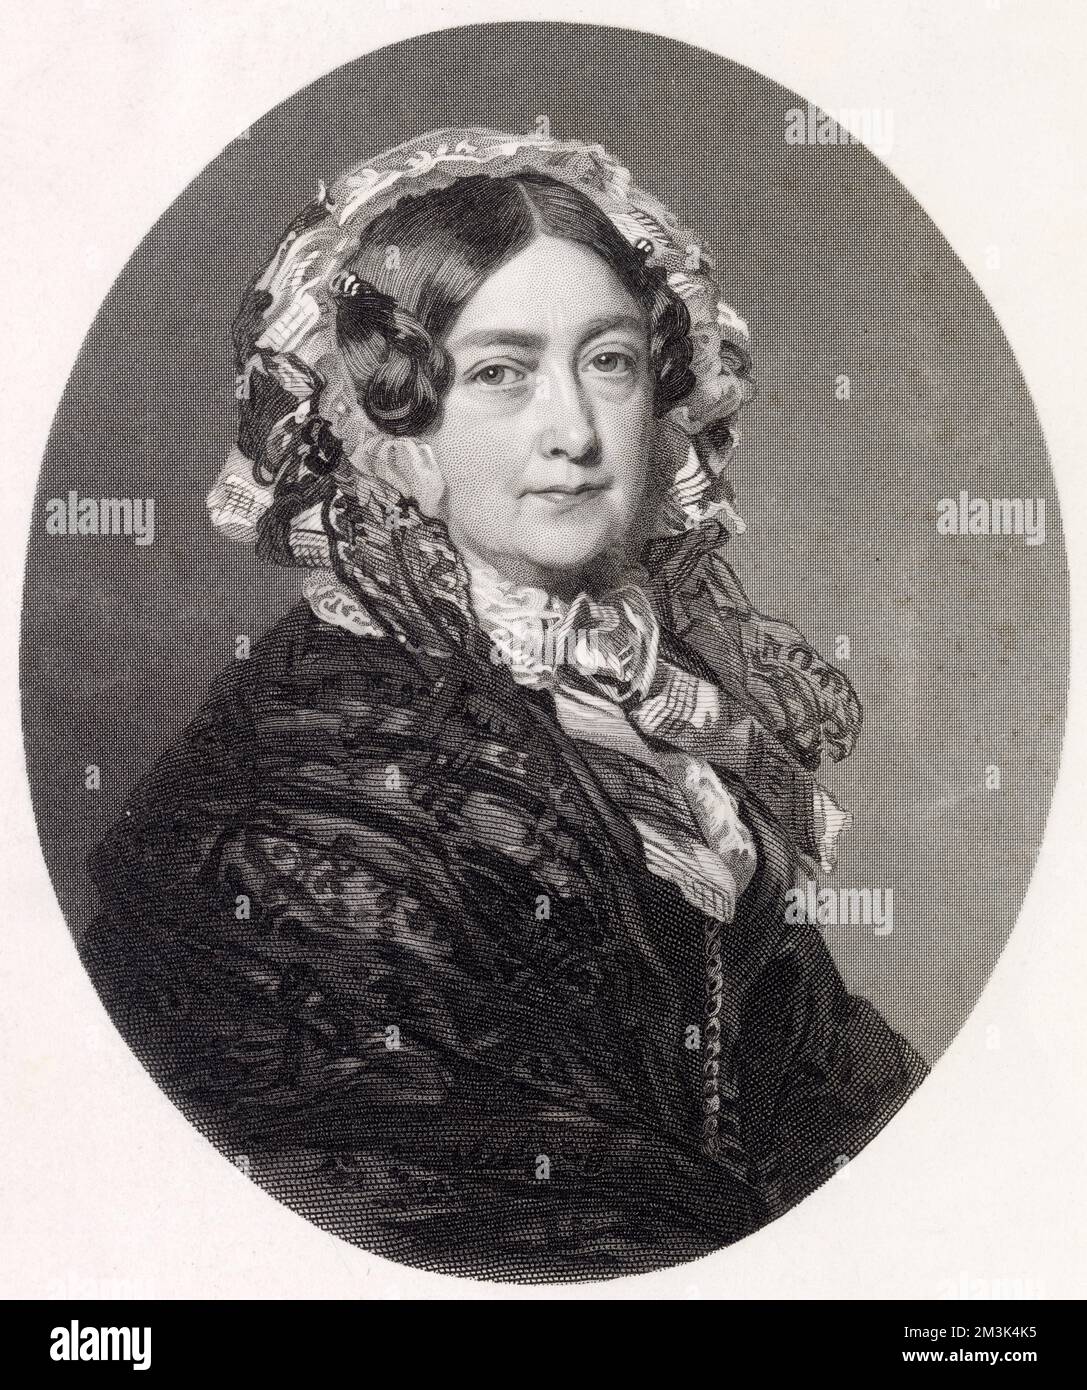 H.R.H. The Duchess of Kent, mother of Queen Victoria. Formerly Victoria of Saxe-Coburg, she was the widowed sister of Leopold of Saxe-Coburg who had himself been widowed in 1817 when Princess Charlotte, George IV's heir, had died in childbirth. The event led to the infamous 'race for wives' among George III's sons and it was Victoria, following her marriage to the Duke of Kent who was the first to produce a female heir to the British throne in 1819. Stock Photo